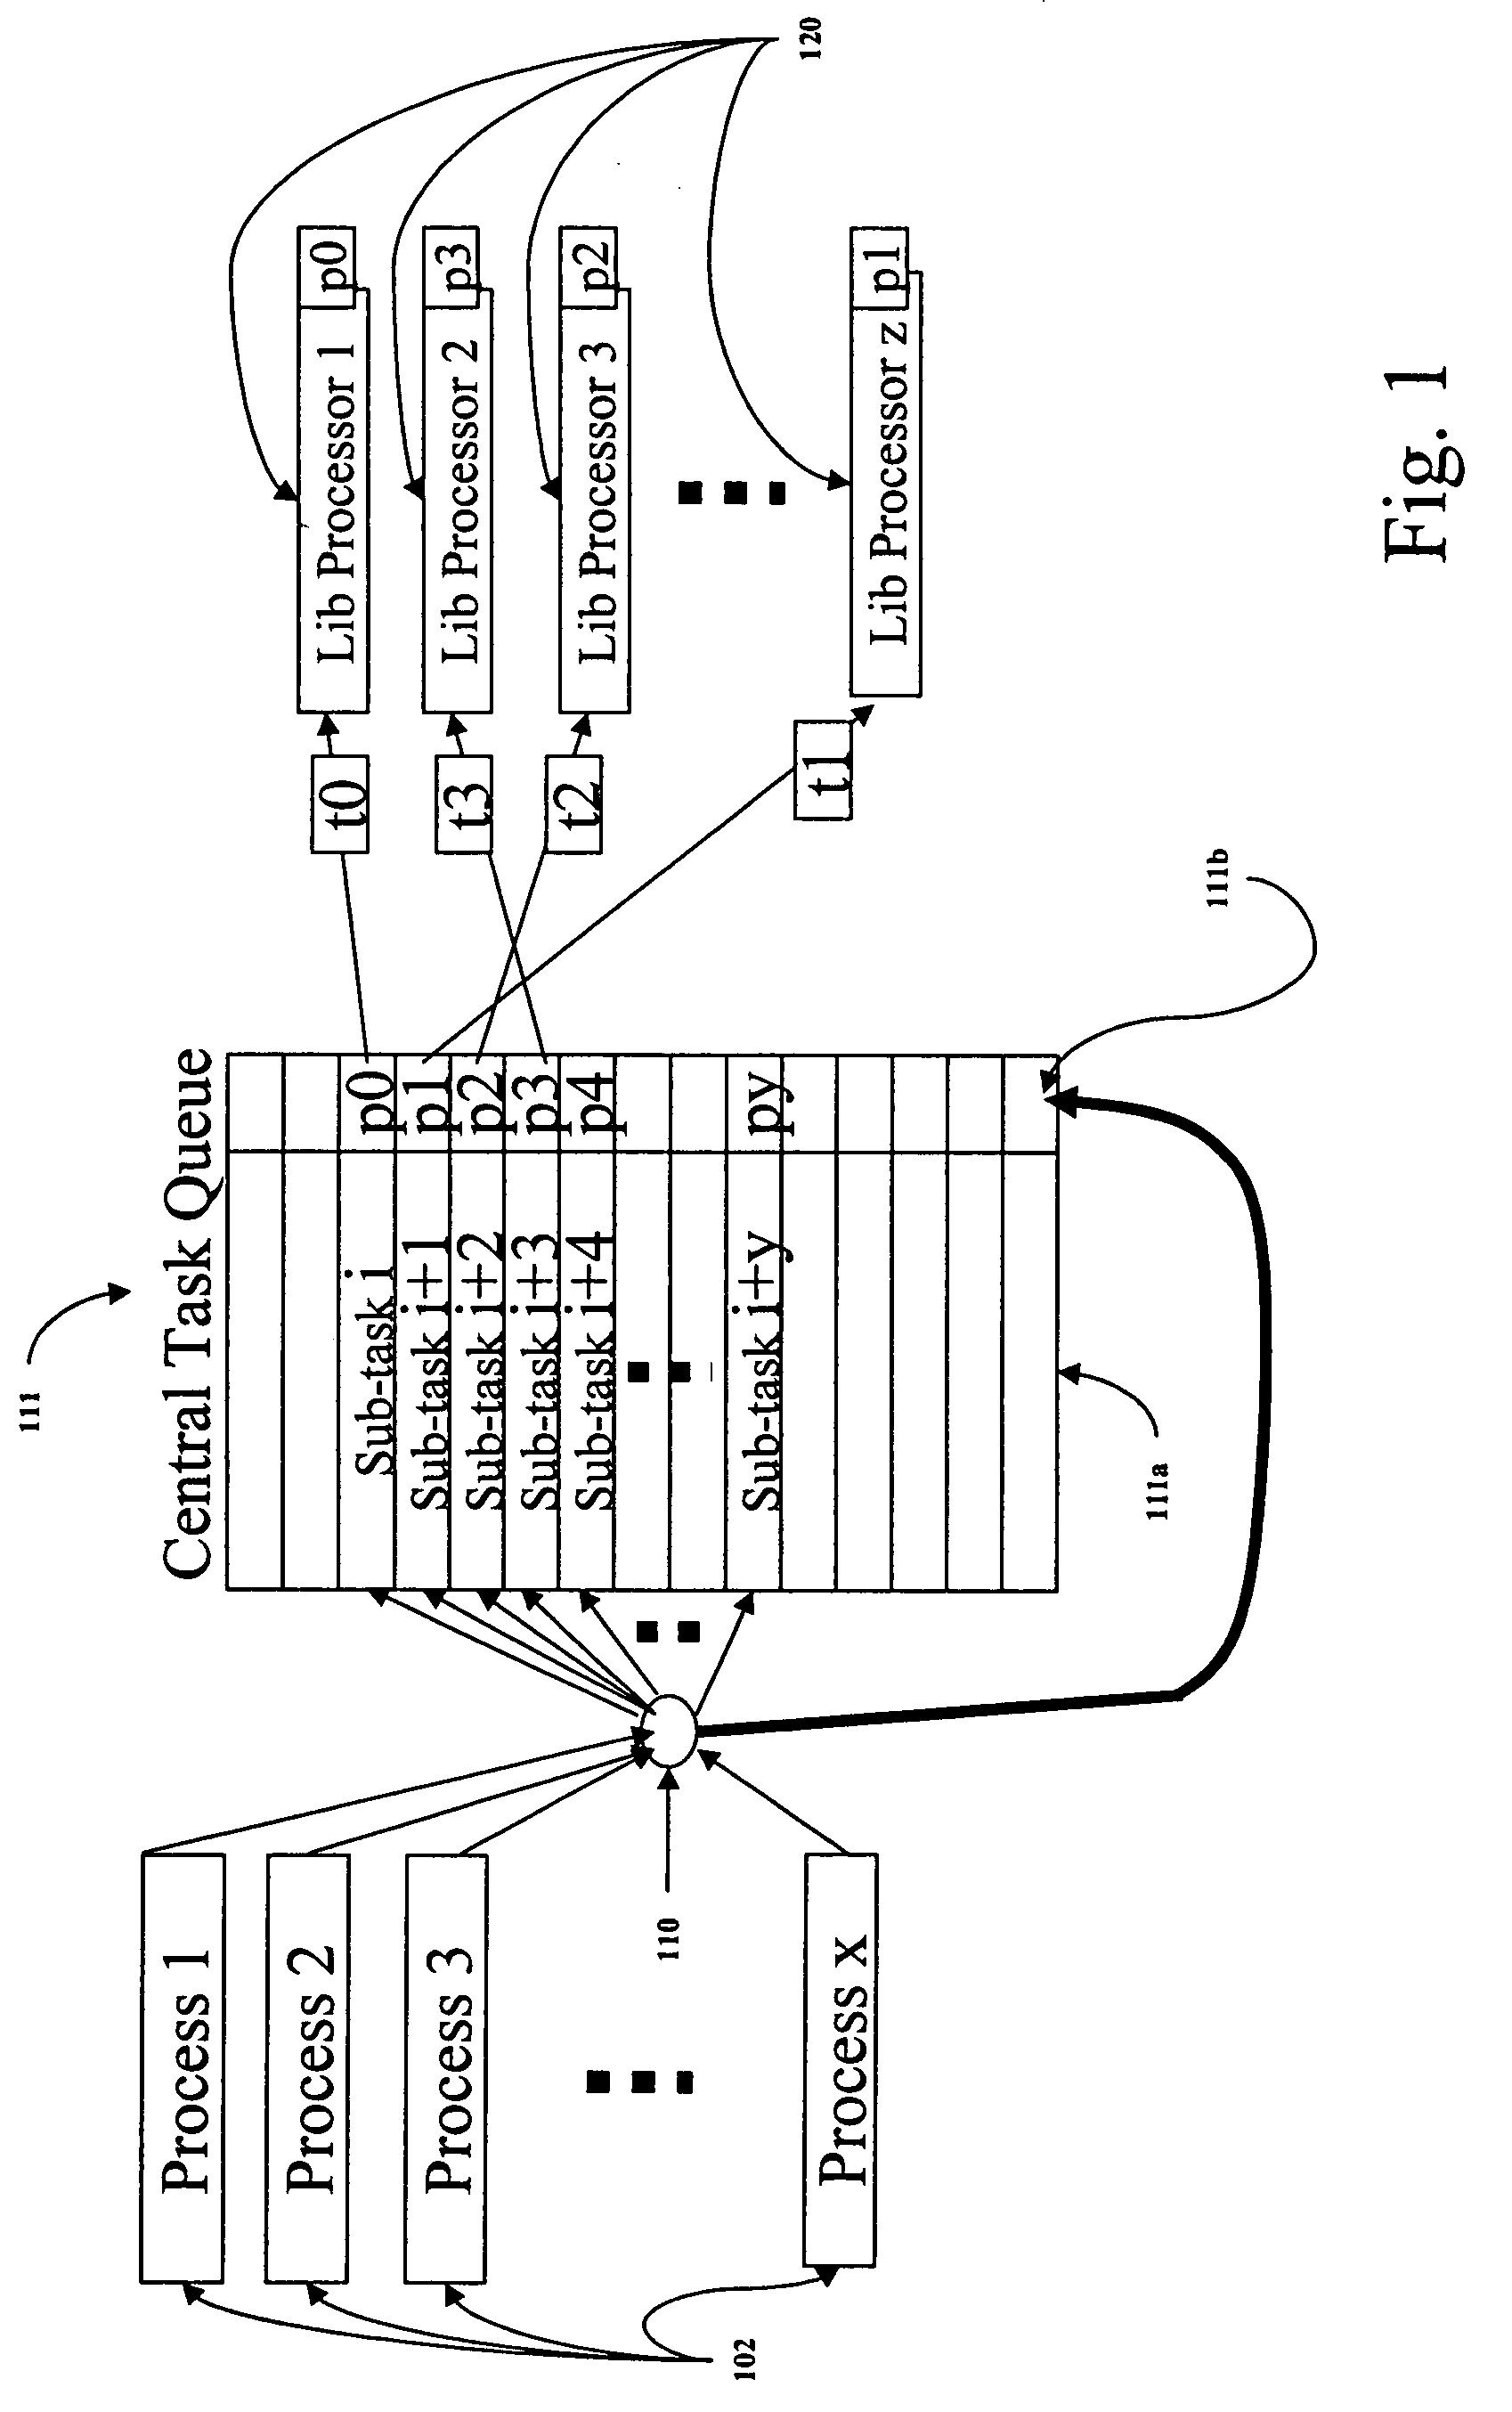 Operating system kernel-assisted, self-balanced, access-protected library framework in a run-to-completion multi-processor environment